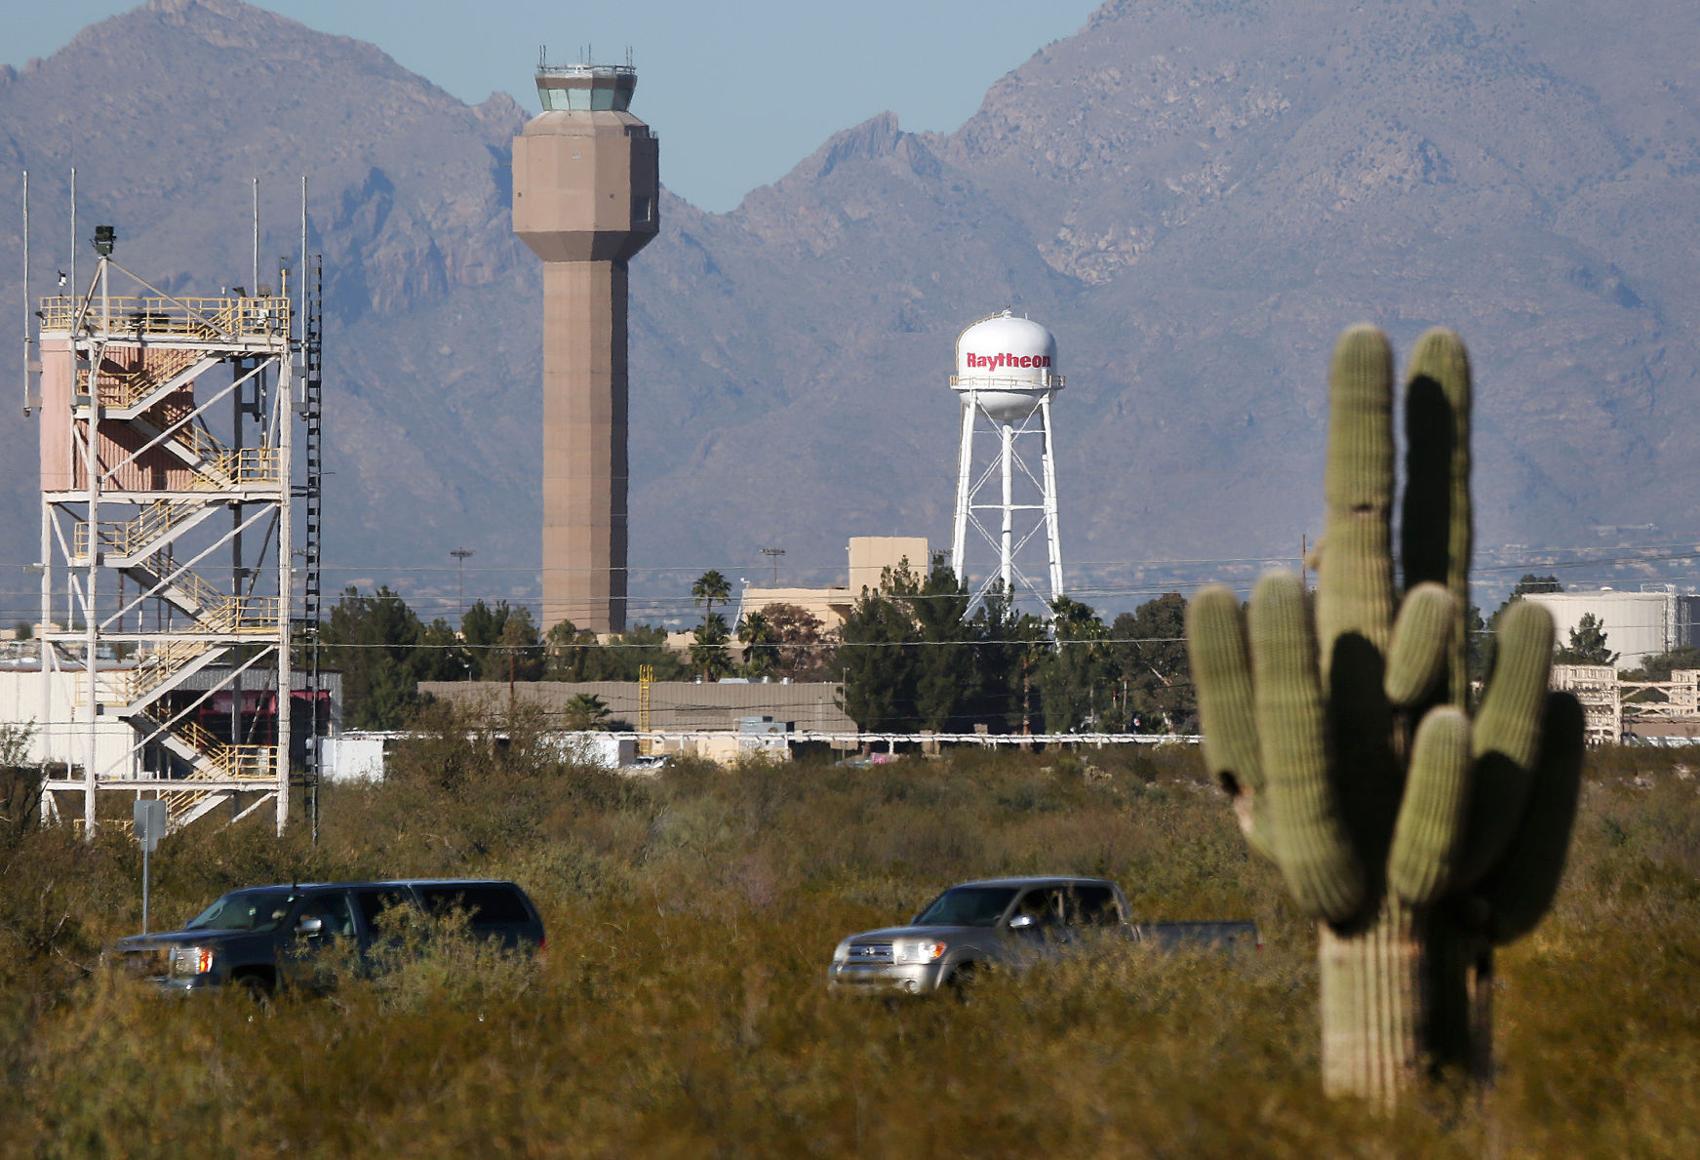 Tucson City Council to vote on incentive deal for Raytheon expansion